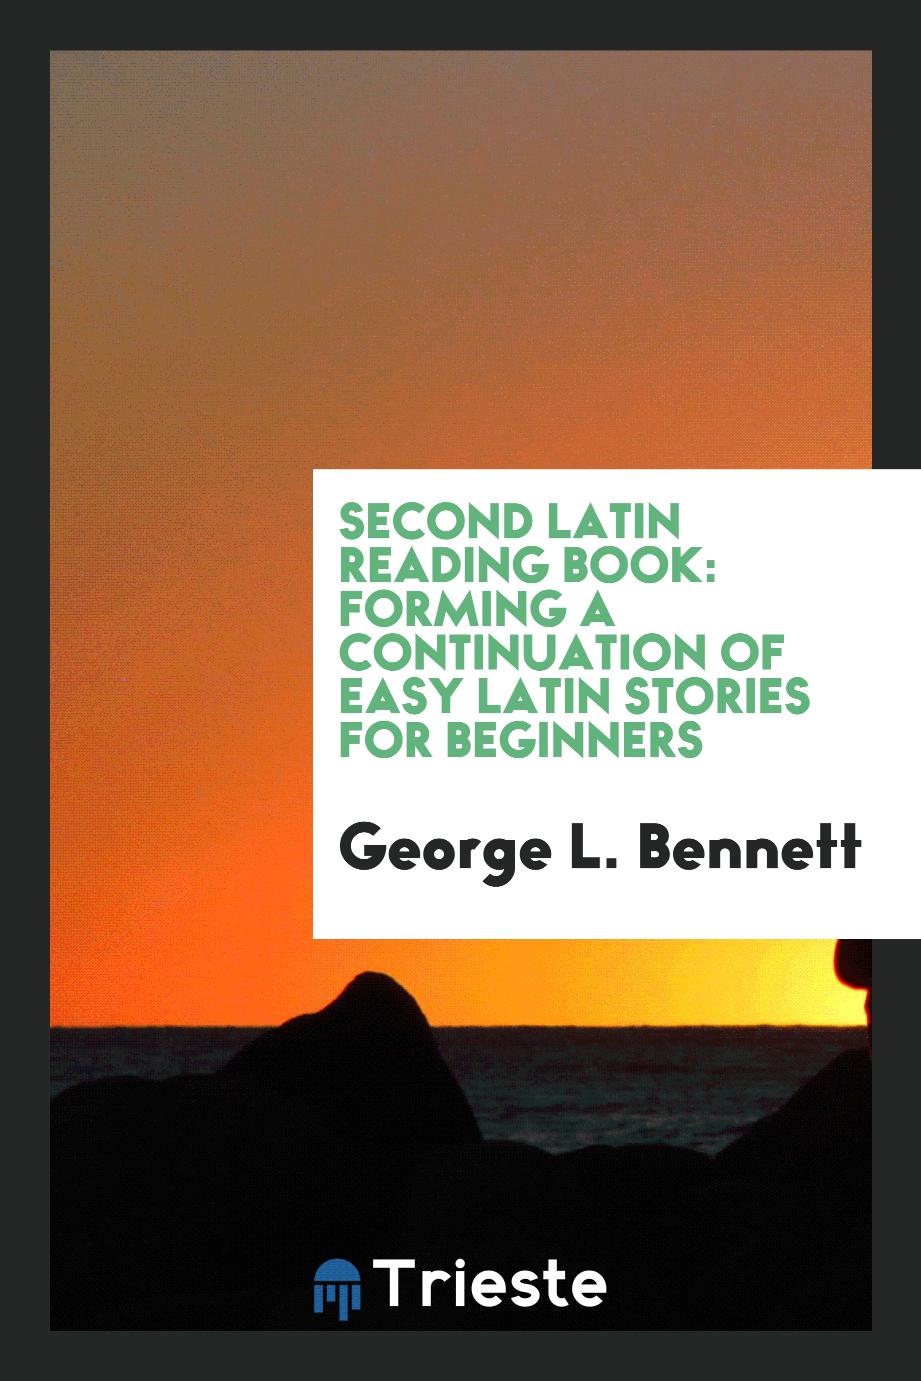 George L. Bennett - Second Latin reading book: forming a continuation of Easy Latin stories for beginners